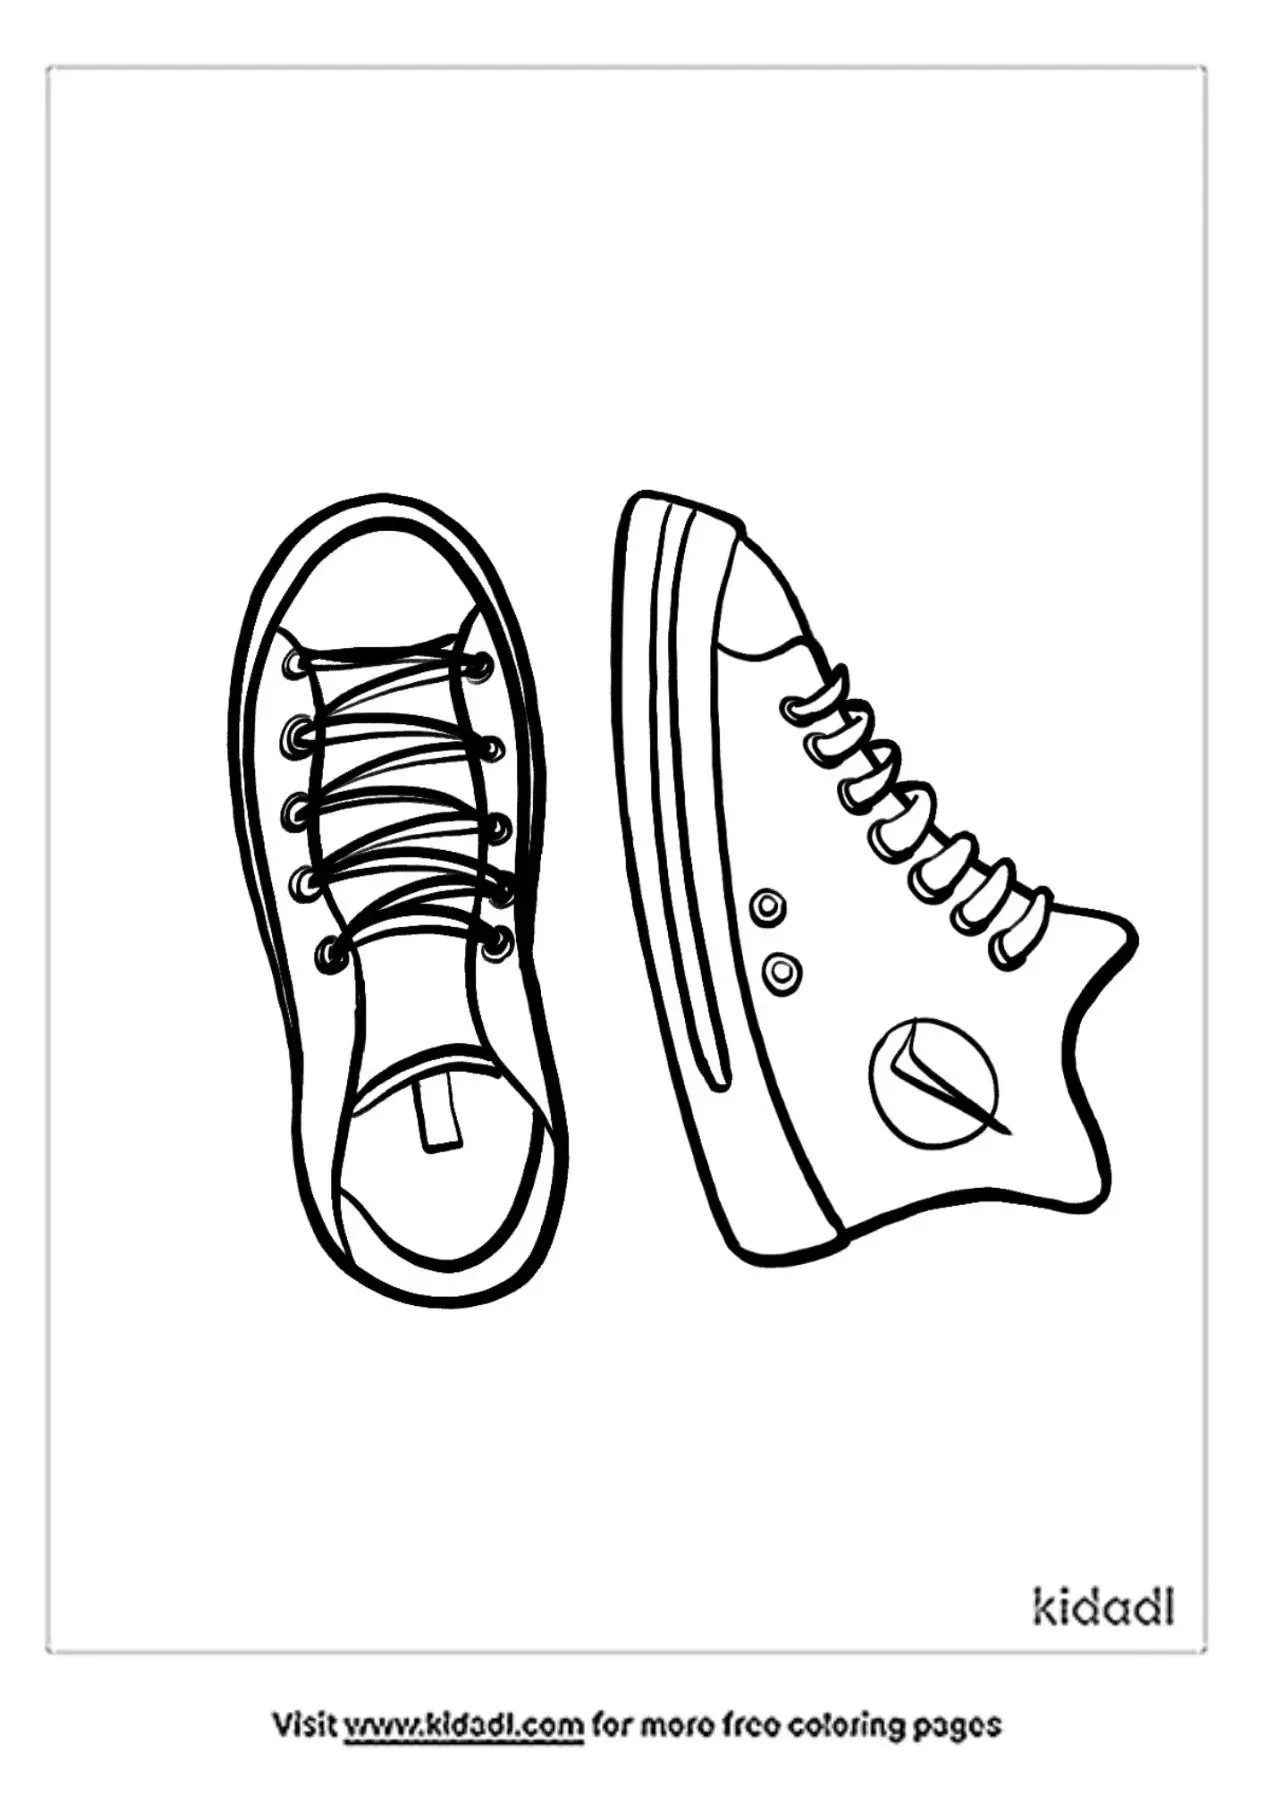 Free Shoes Coloring Page | Coloring Page Printables | Kidadl